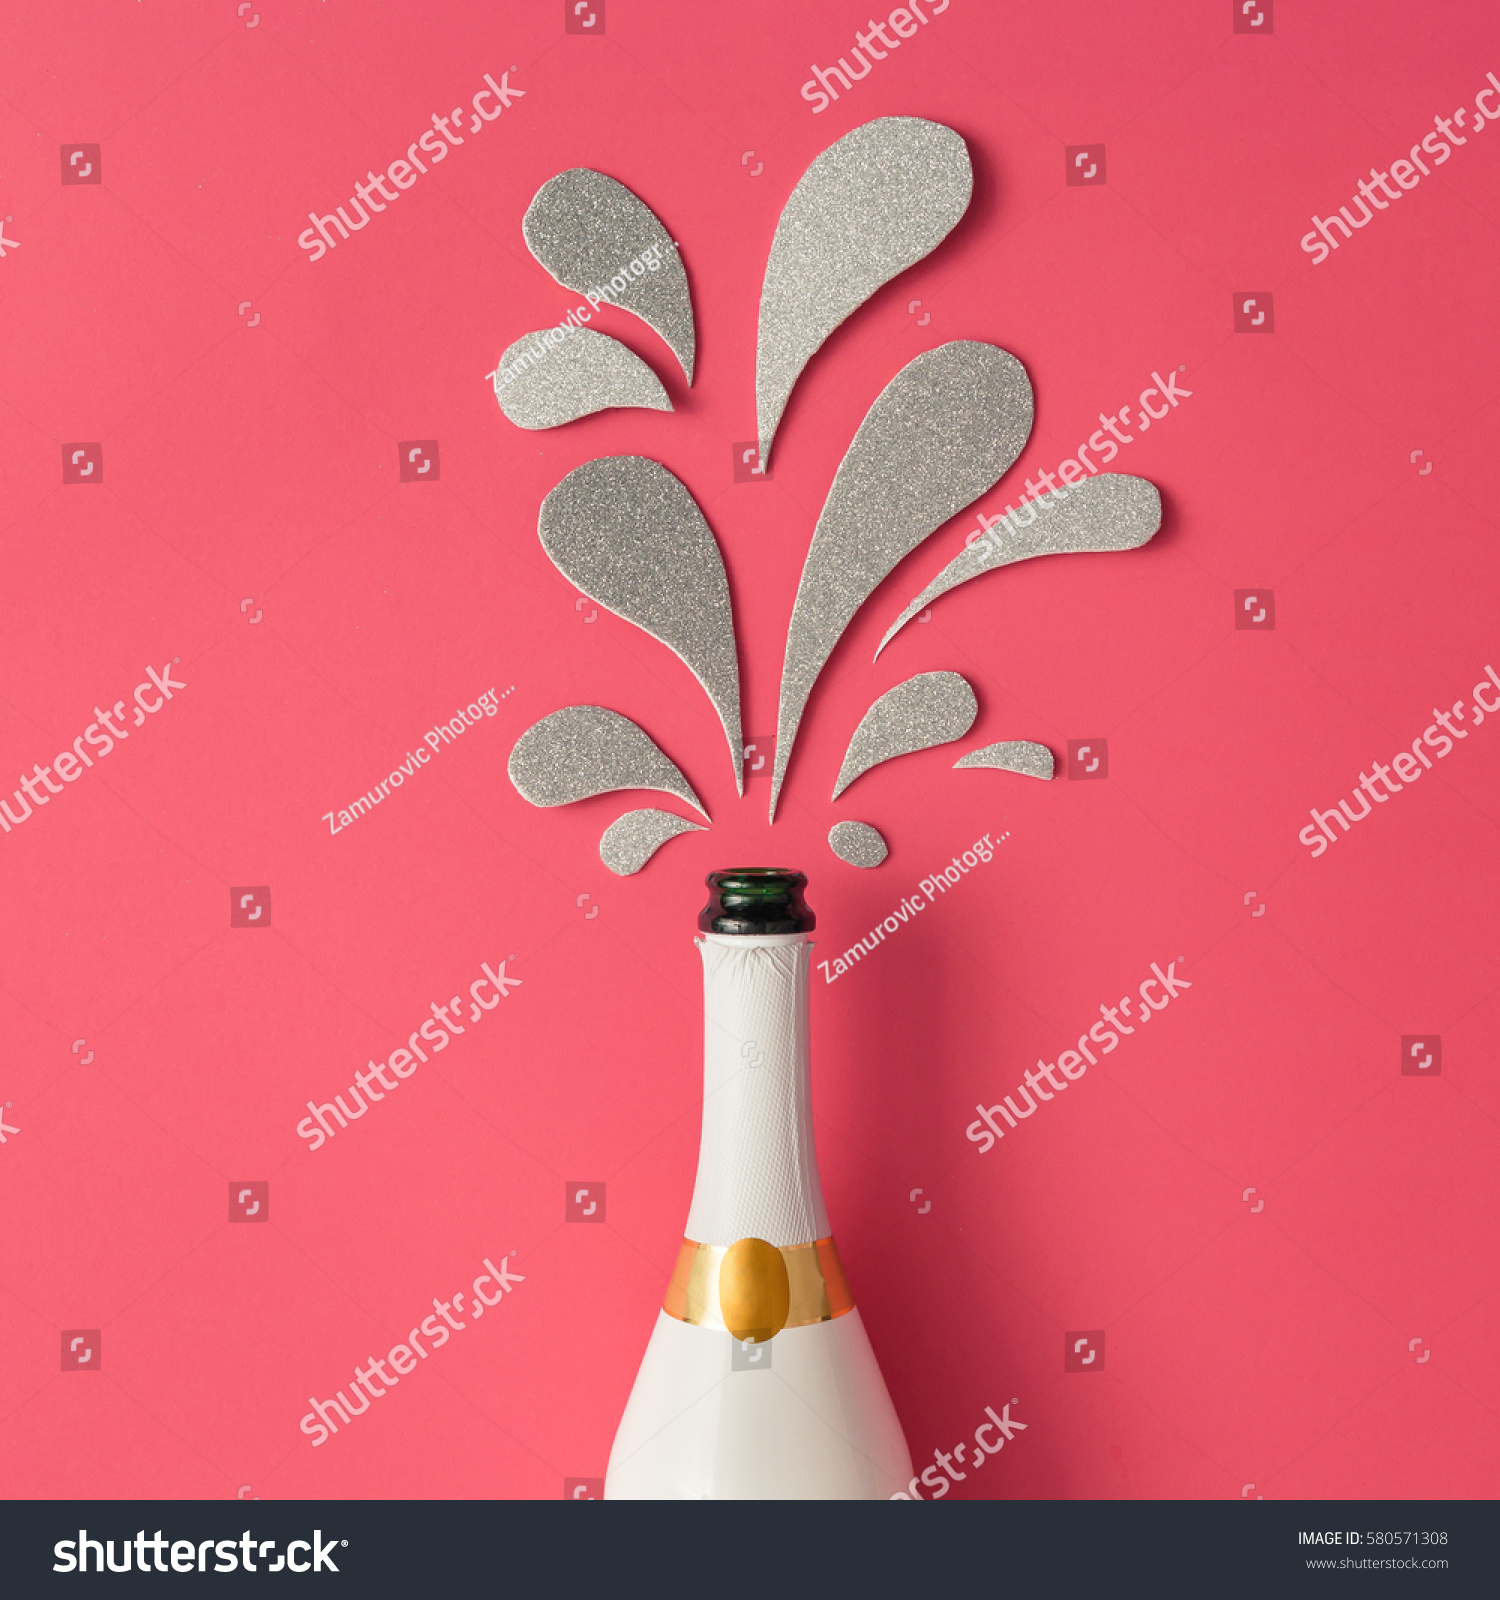 White champagne bottle with silver glittering splashes on pink background. Flat lay. Minimal party concept. #580571308